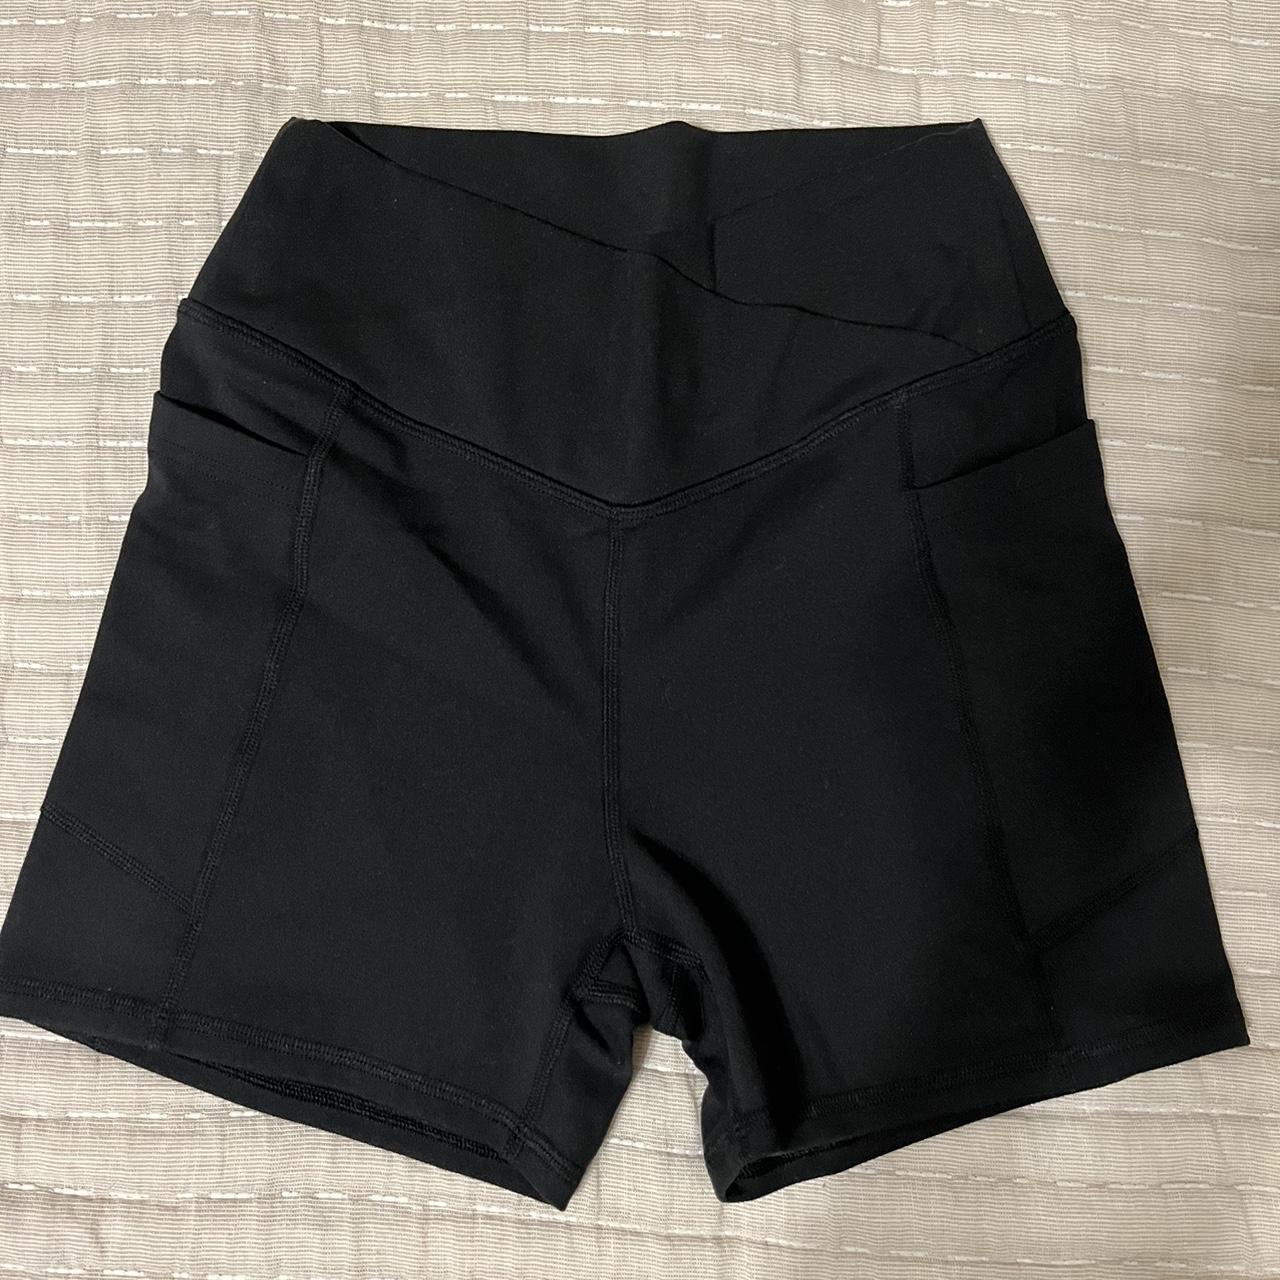 Hollister Gilly Hicks High Rise Bike Shorts ⥽ these - Depop